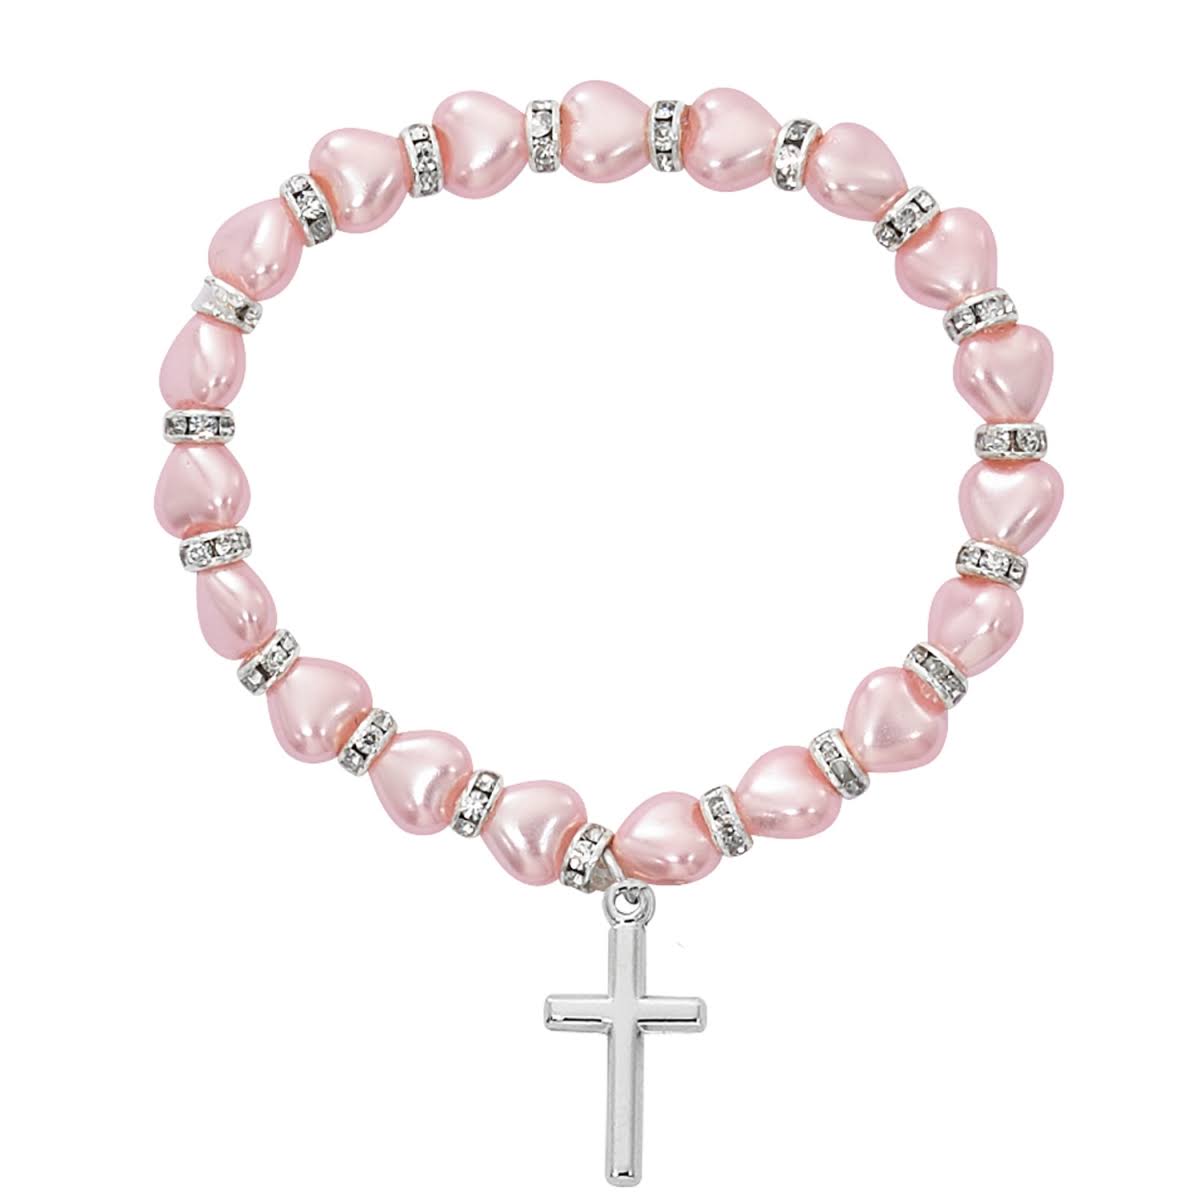 Mcvan BR41 5.5 in. 5 x 6 mm Pink Pearl Like Heart Baby Stretch Bracelet with Pewter Cross Boxed